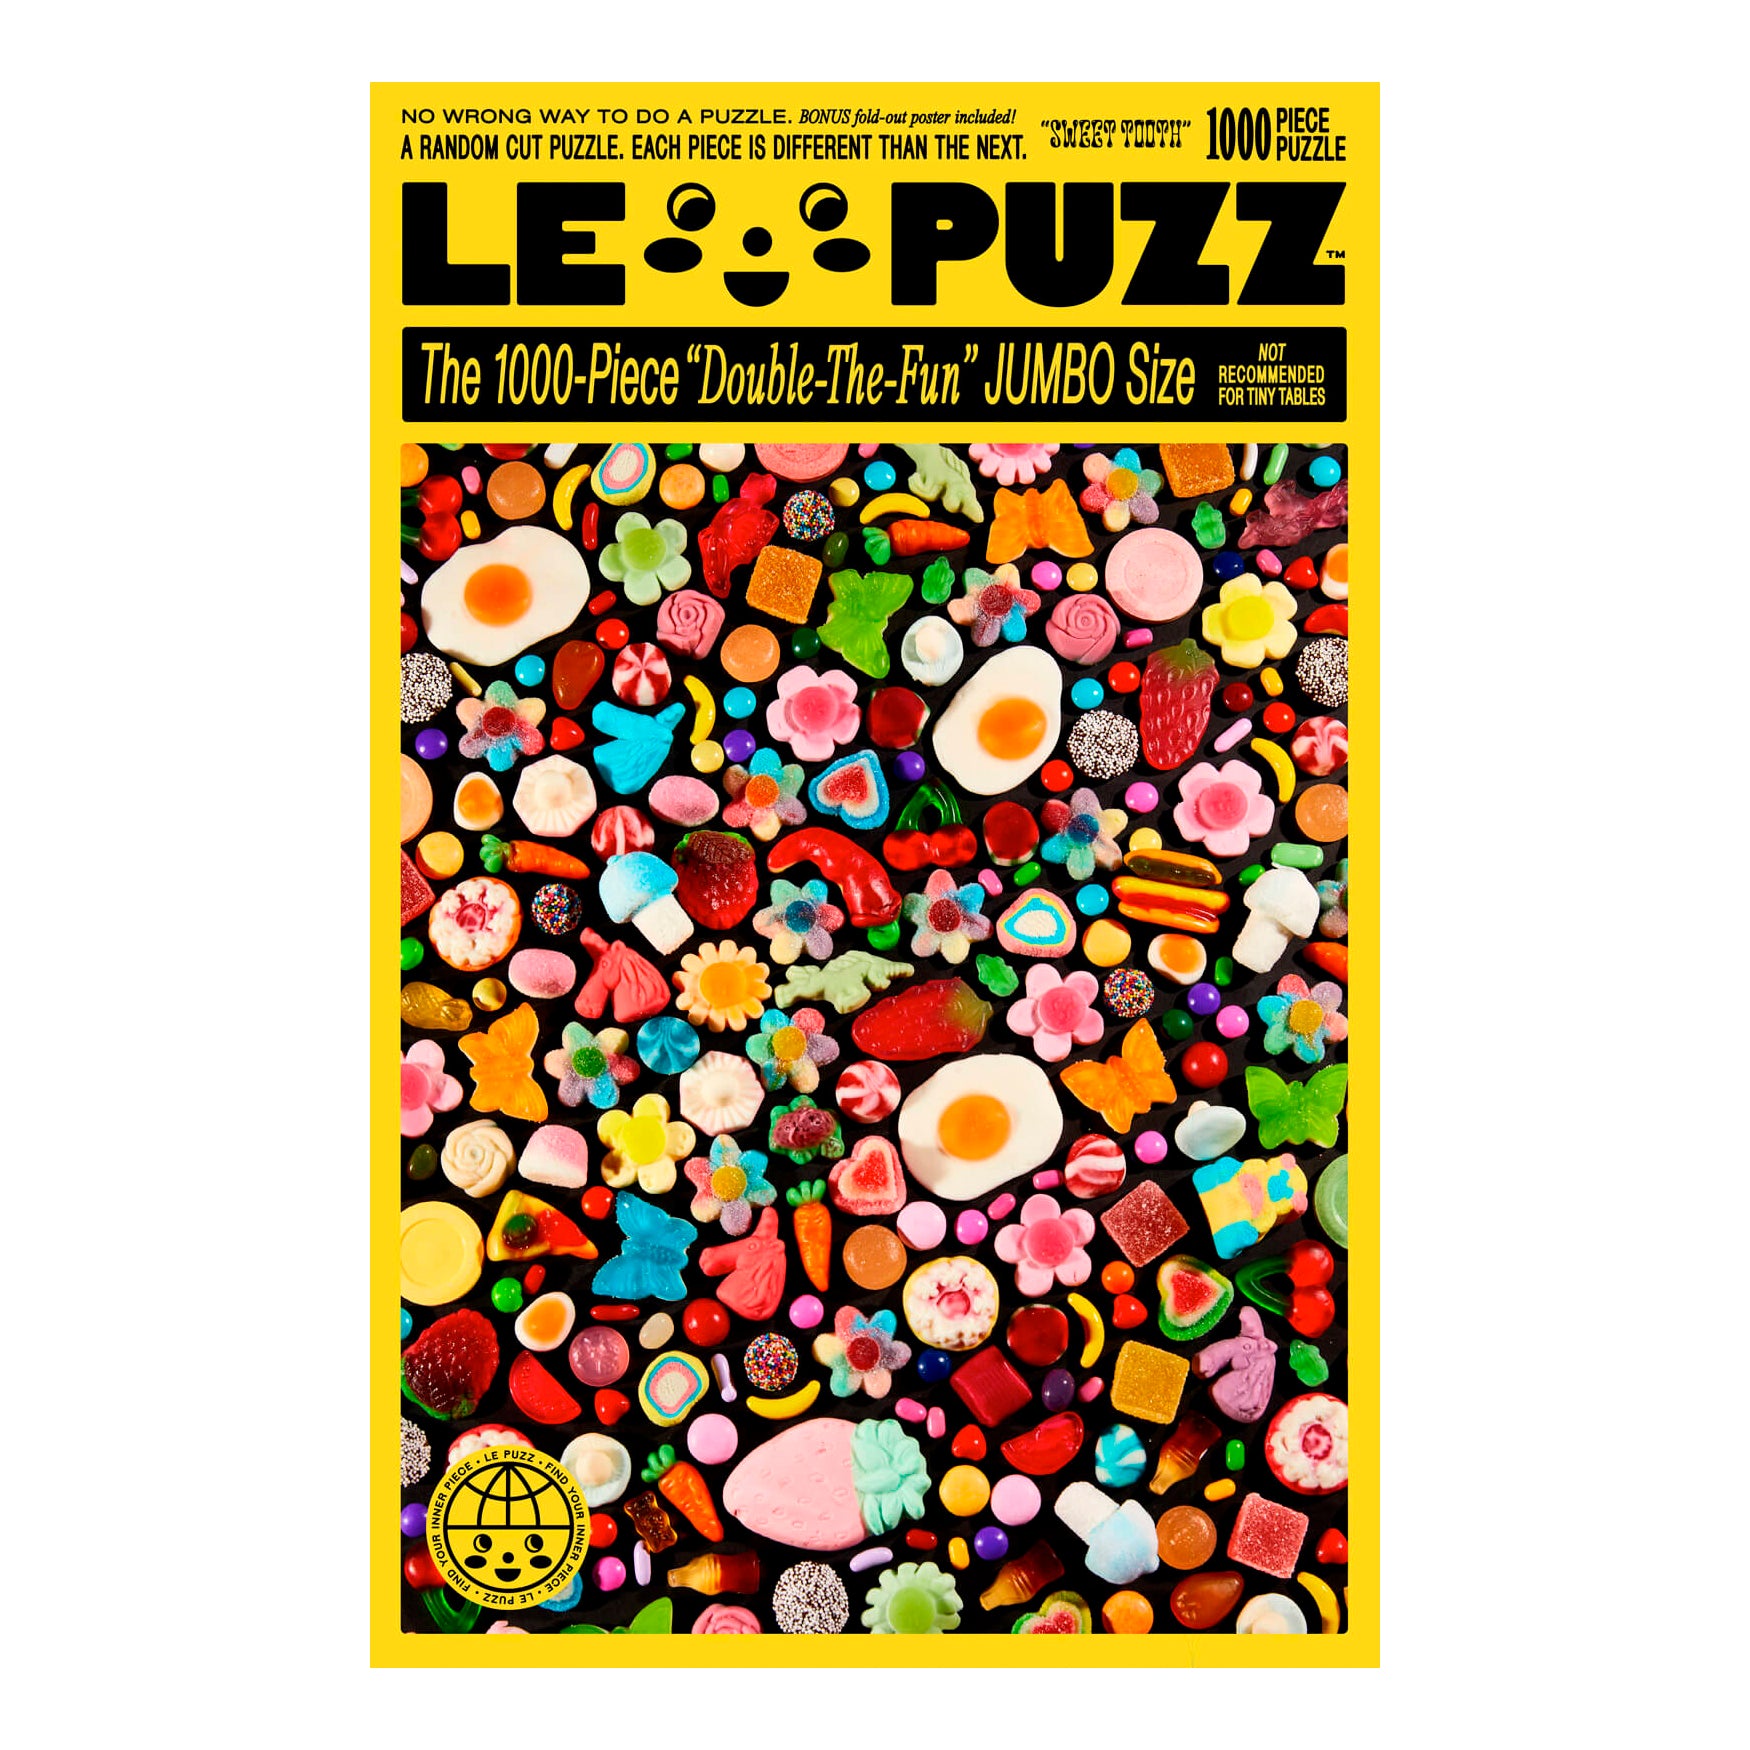 Puzzle Sweet Tooth - Le Puzz